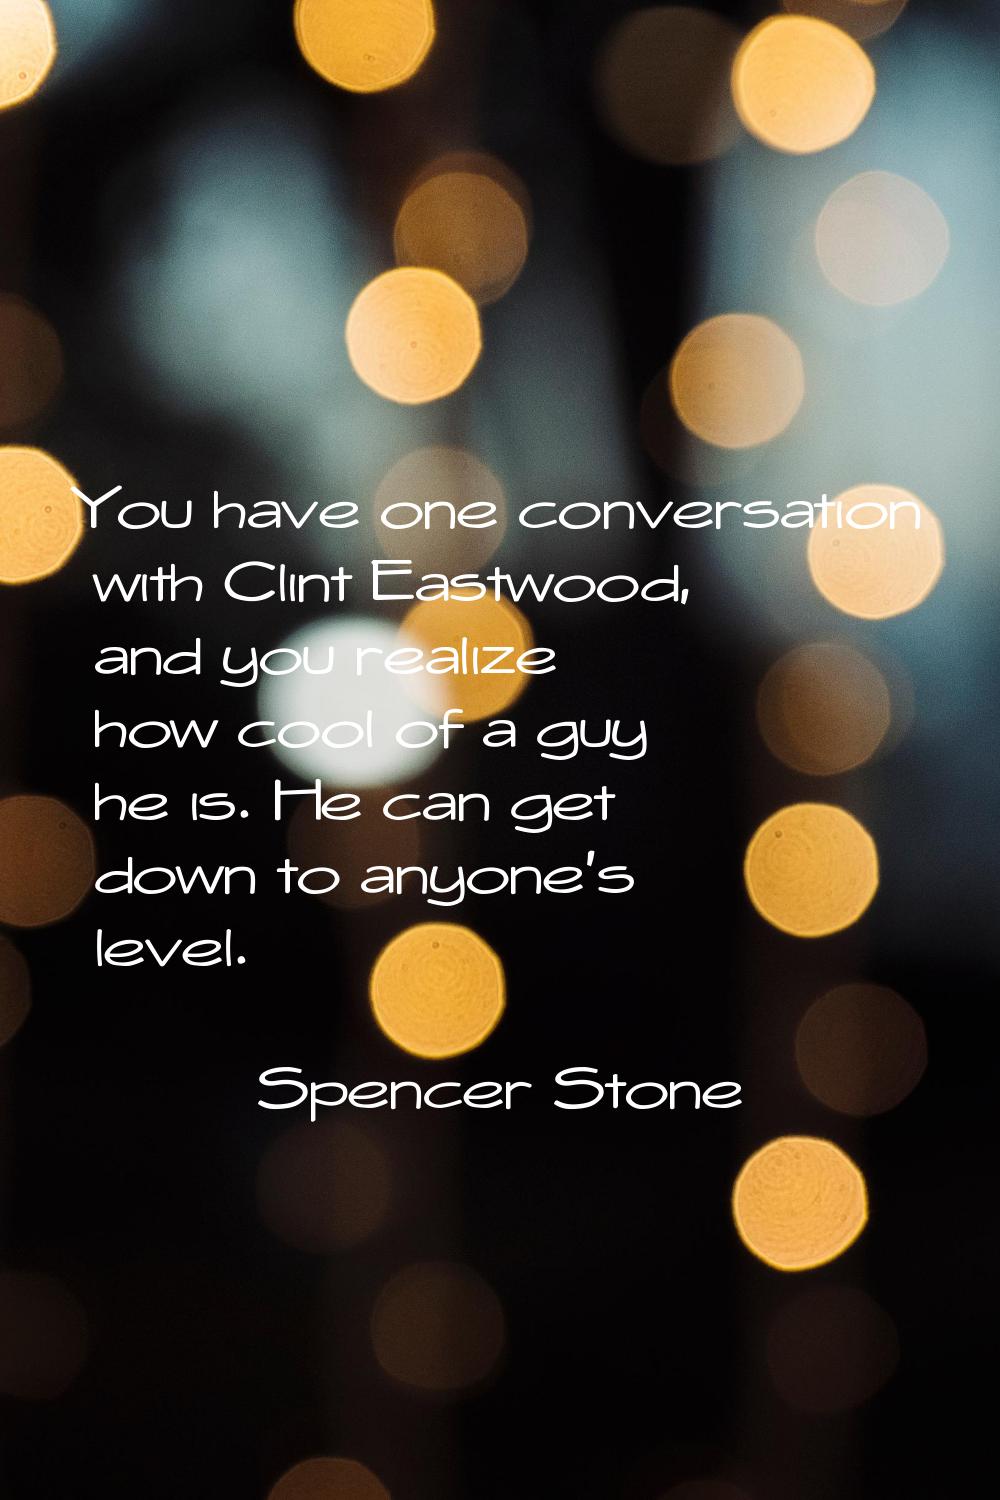 You have one conversation with Clint Eastwood, and you realize how cool of a guy he is. He can get 